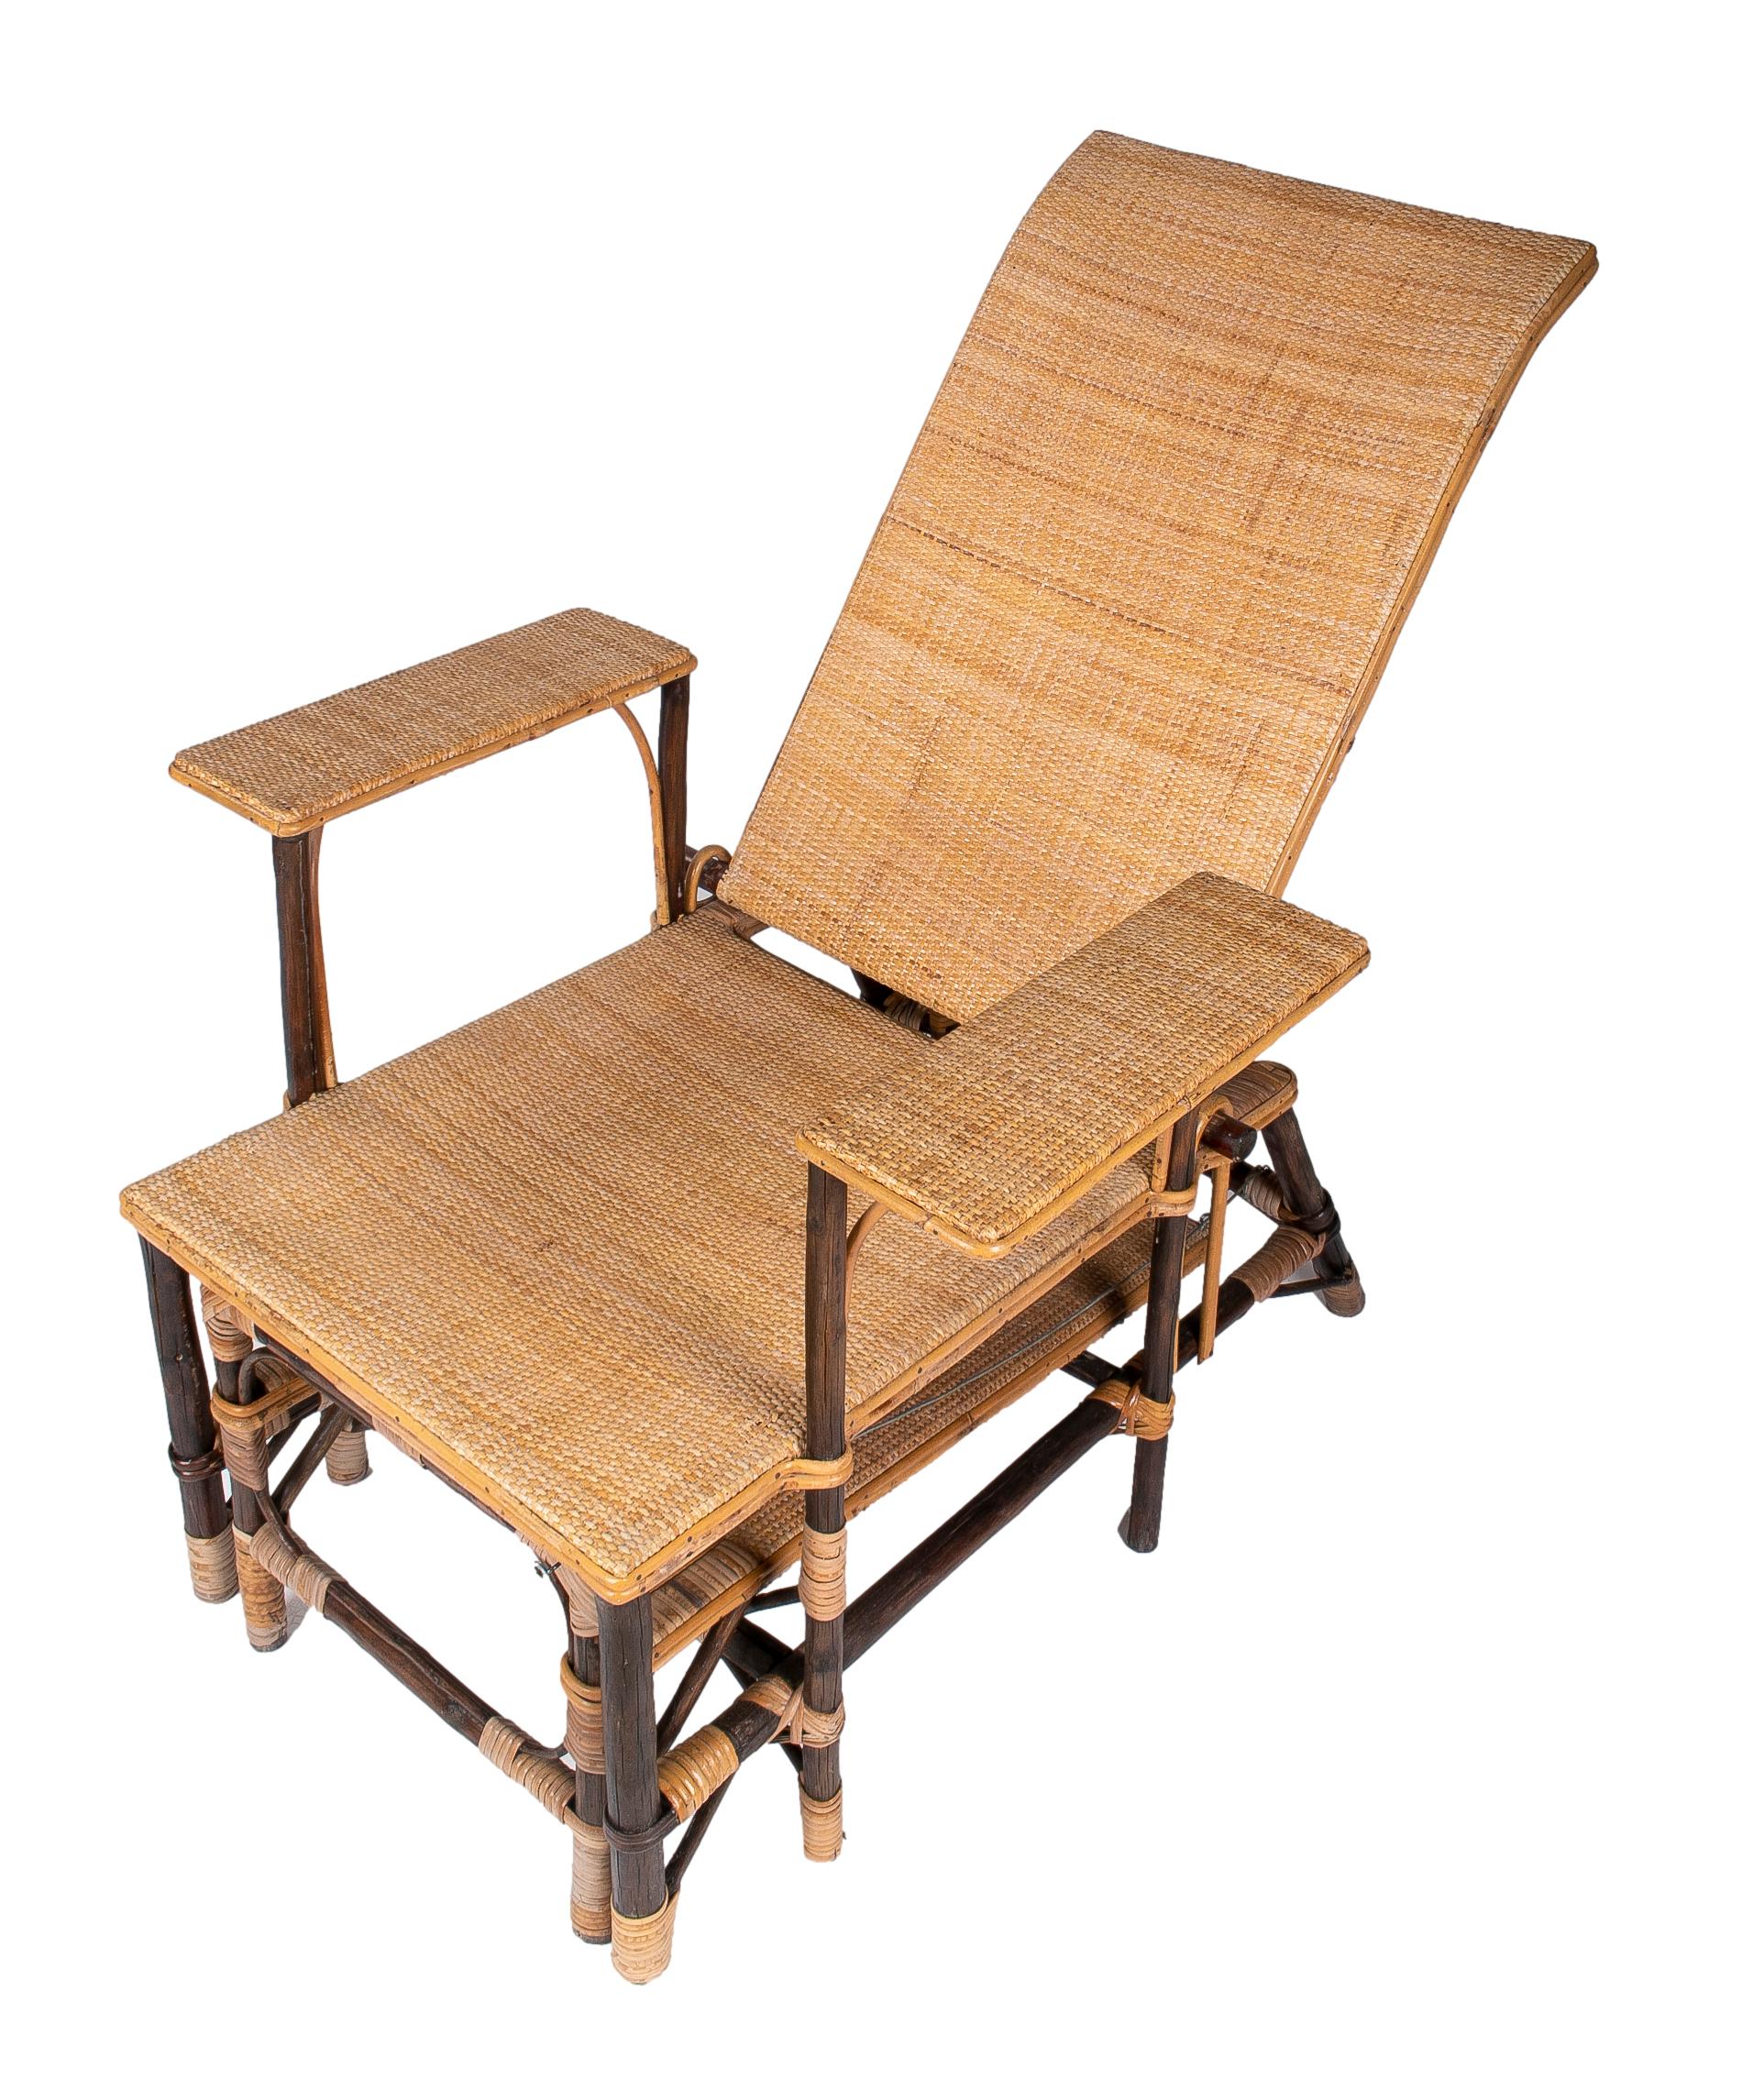 1980s Spanish Woven Wicker & Bamboo Sunbathing Lounge Chair For Sale 1